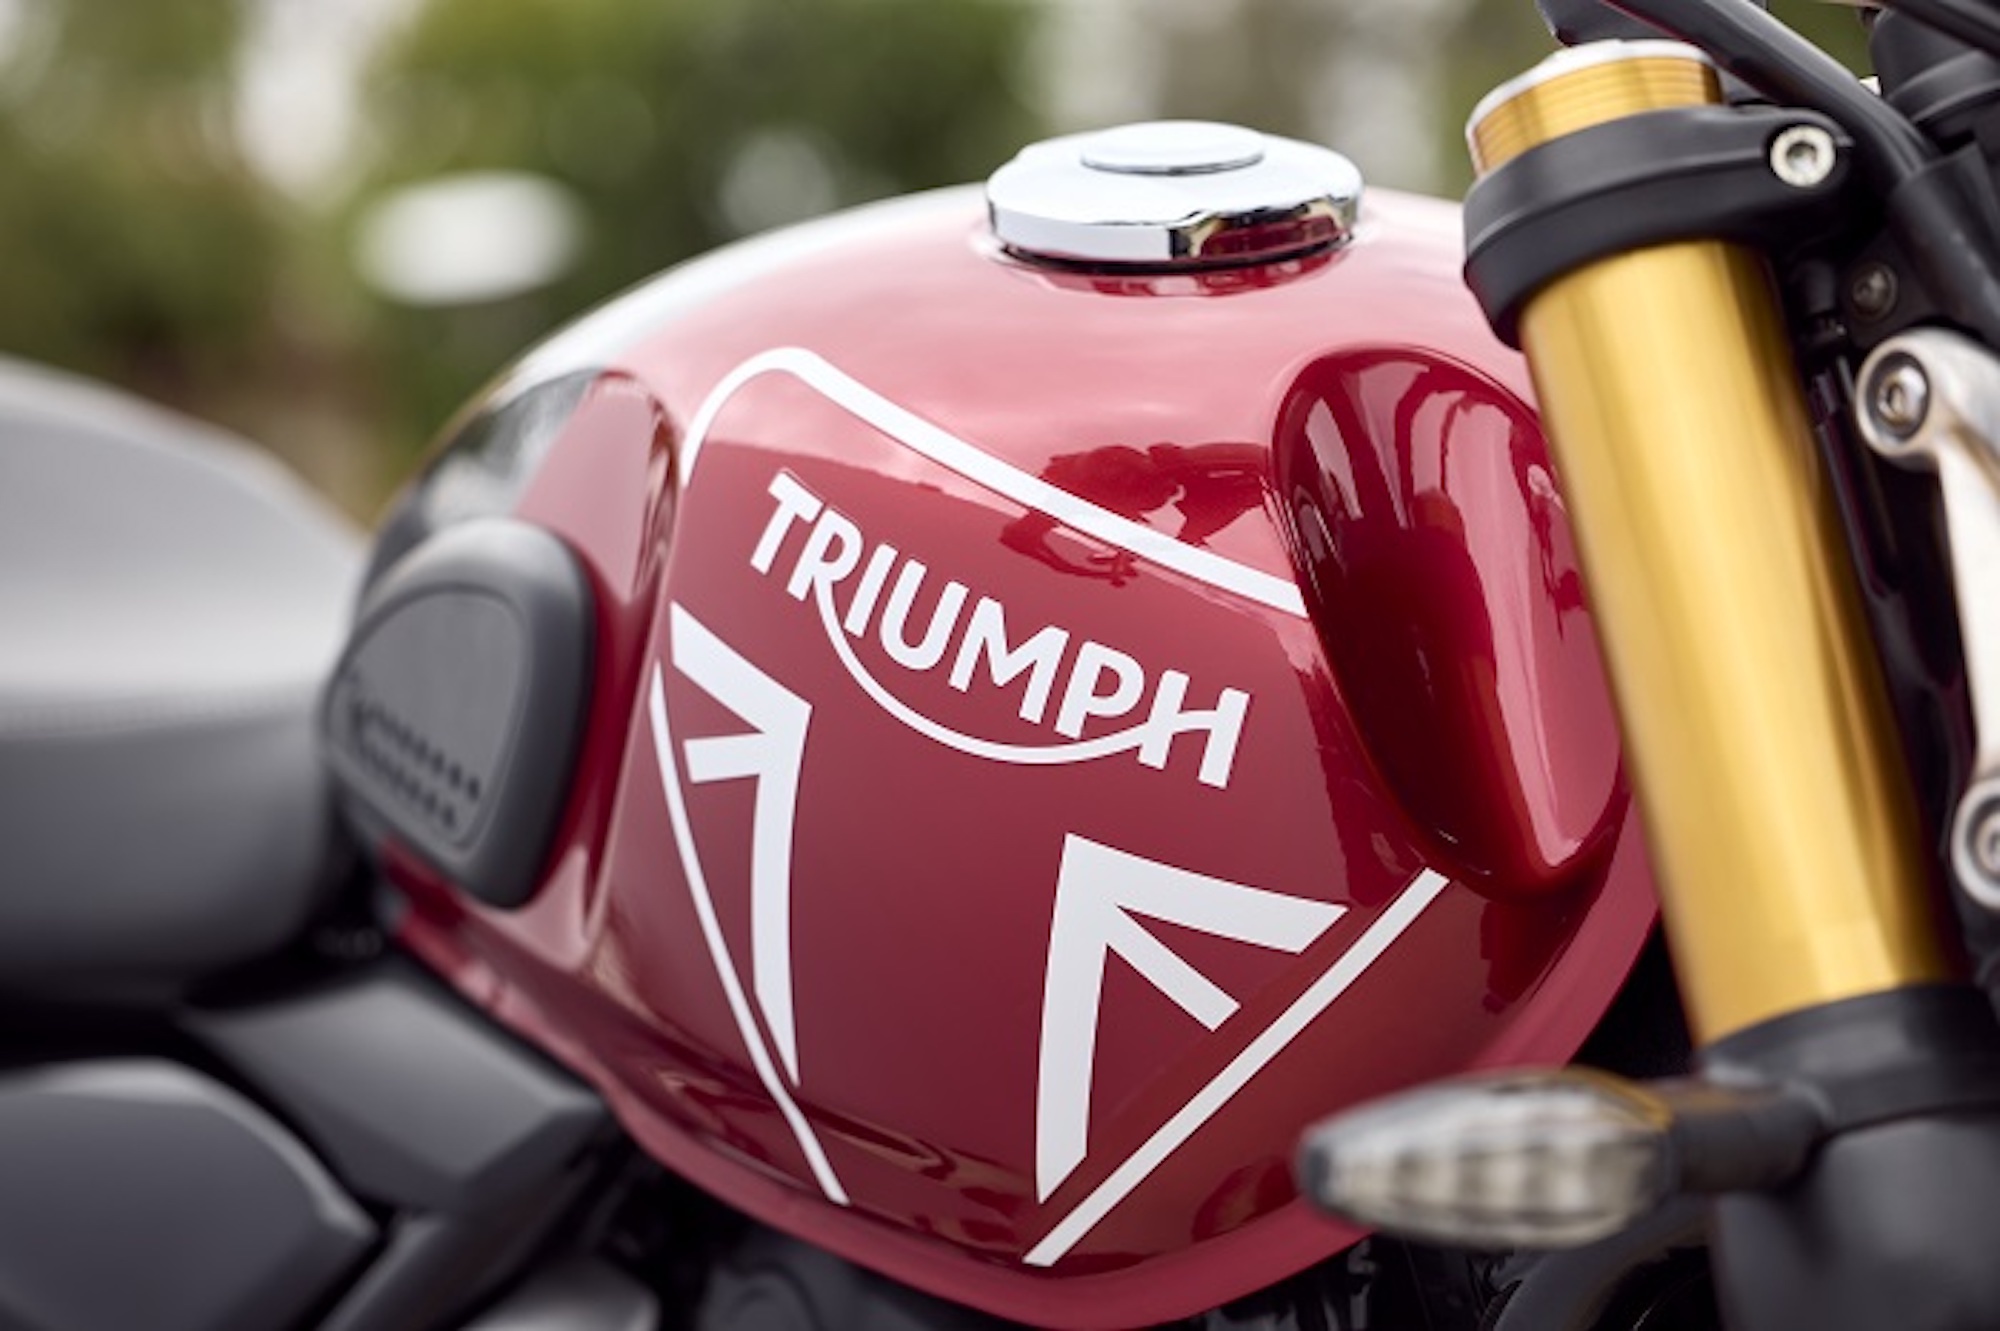 A prime view of Triumph's new 400cc beasties - the Speed 400 and Scrambler 400 X. Media sourced from Triumph.